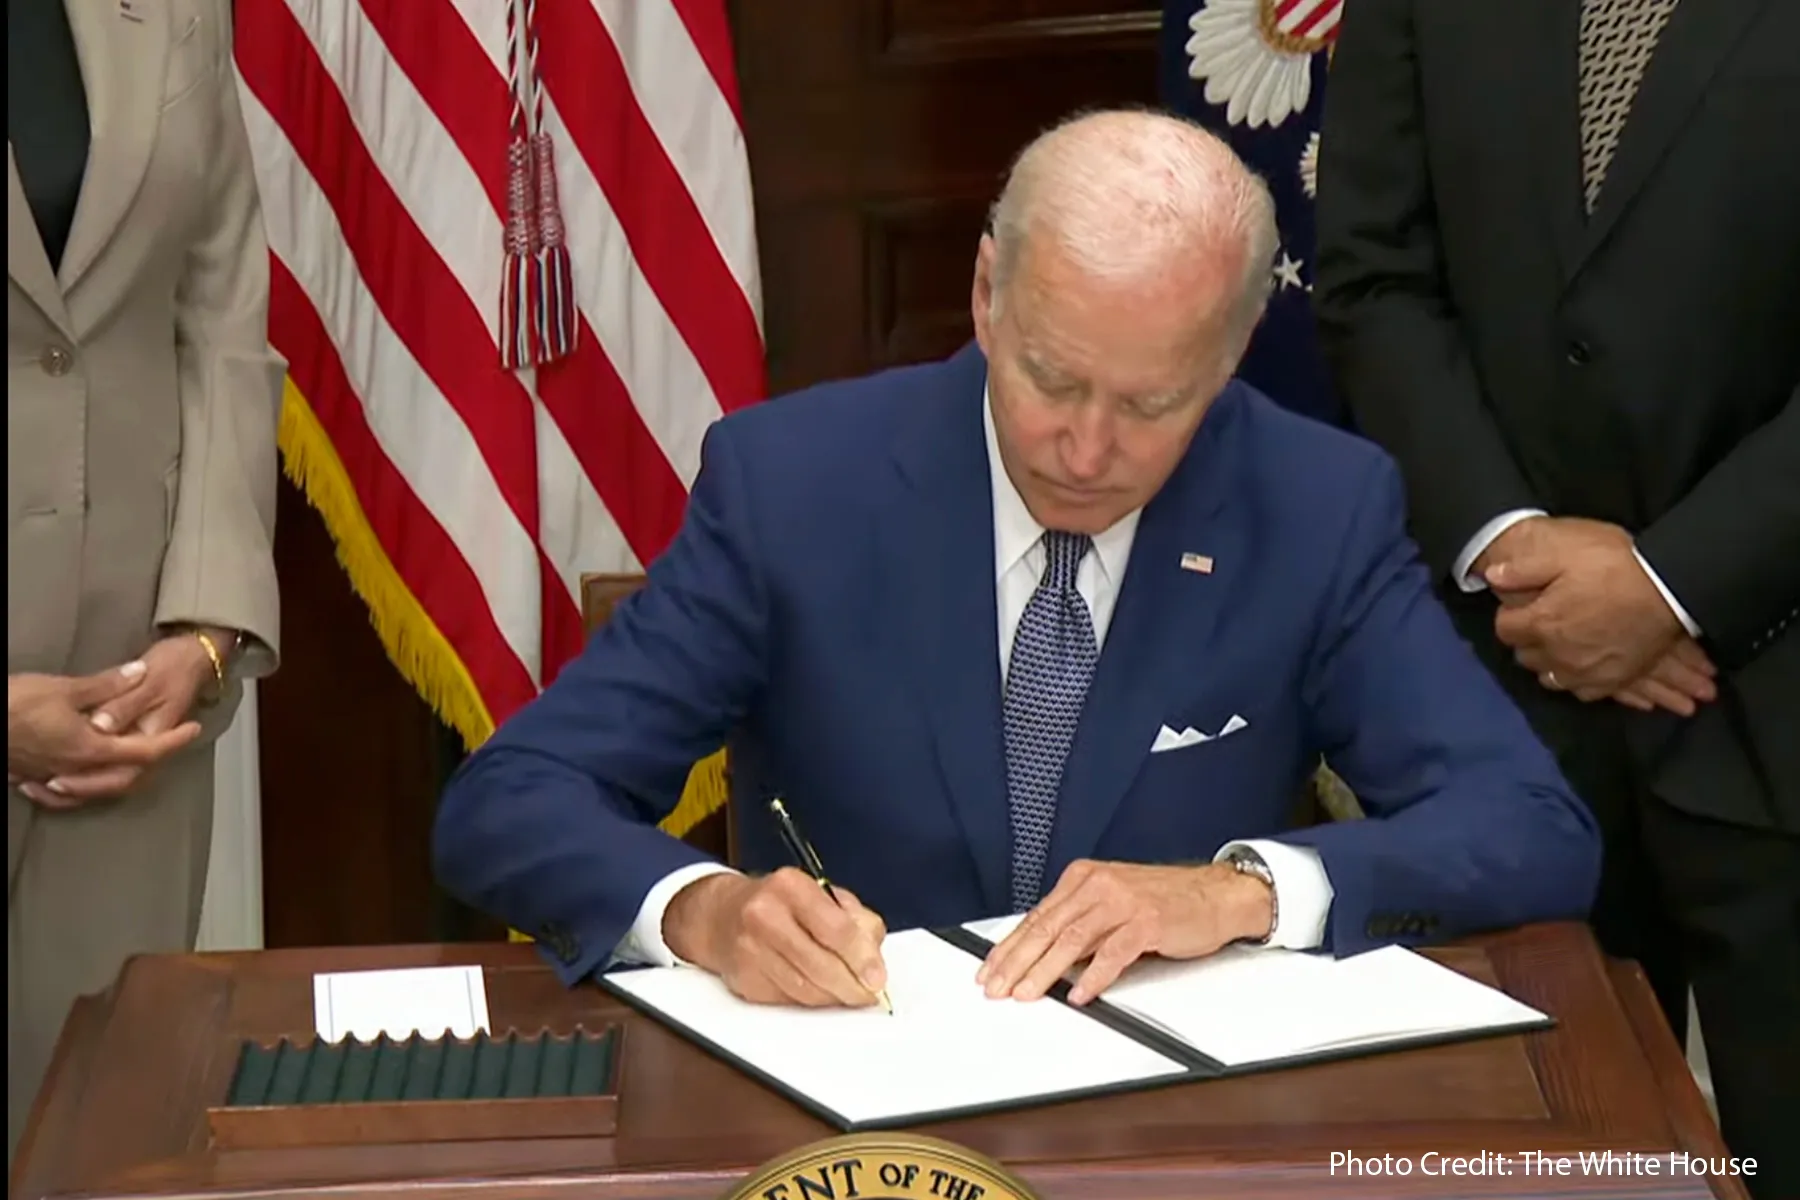 Biden Moves to Protect Access to Reproductive Health Care